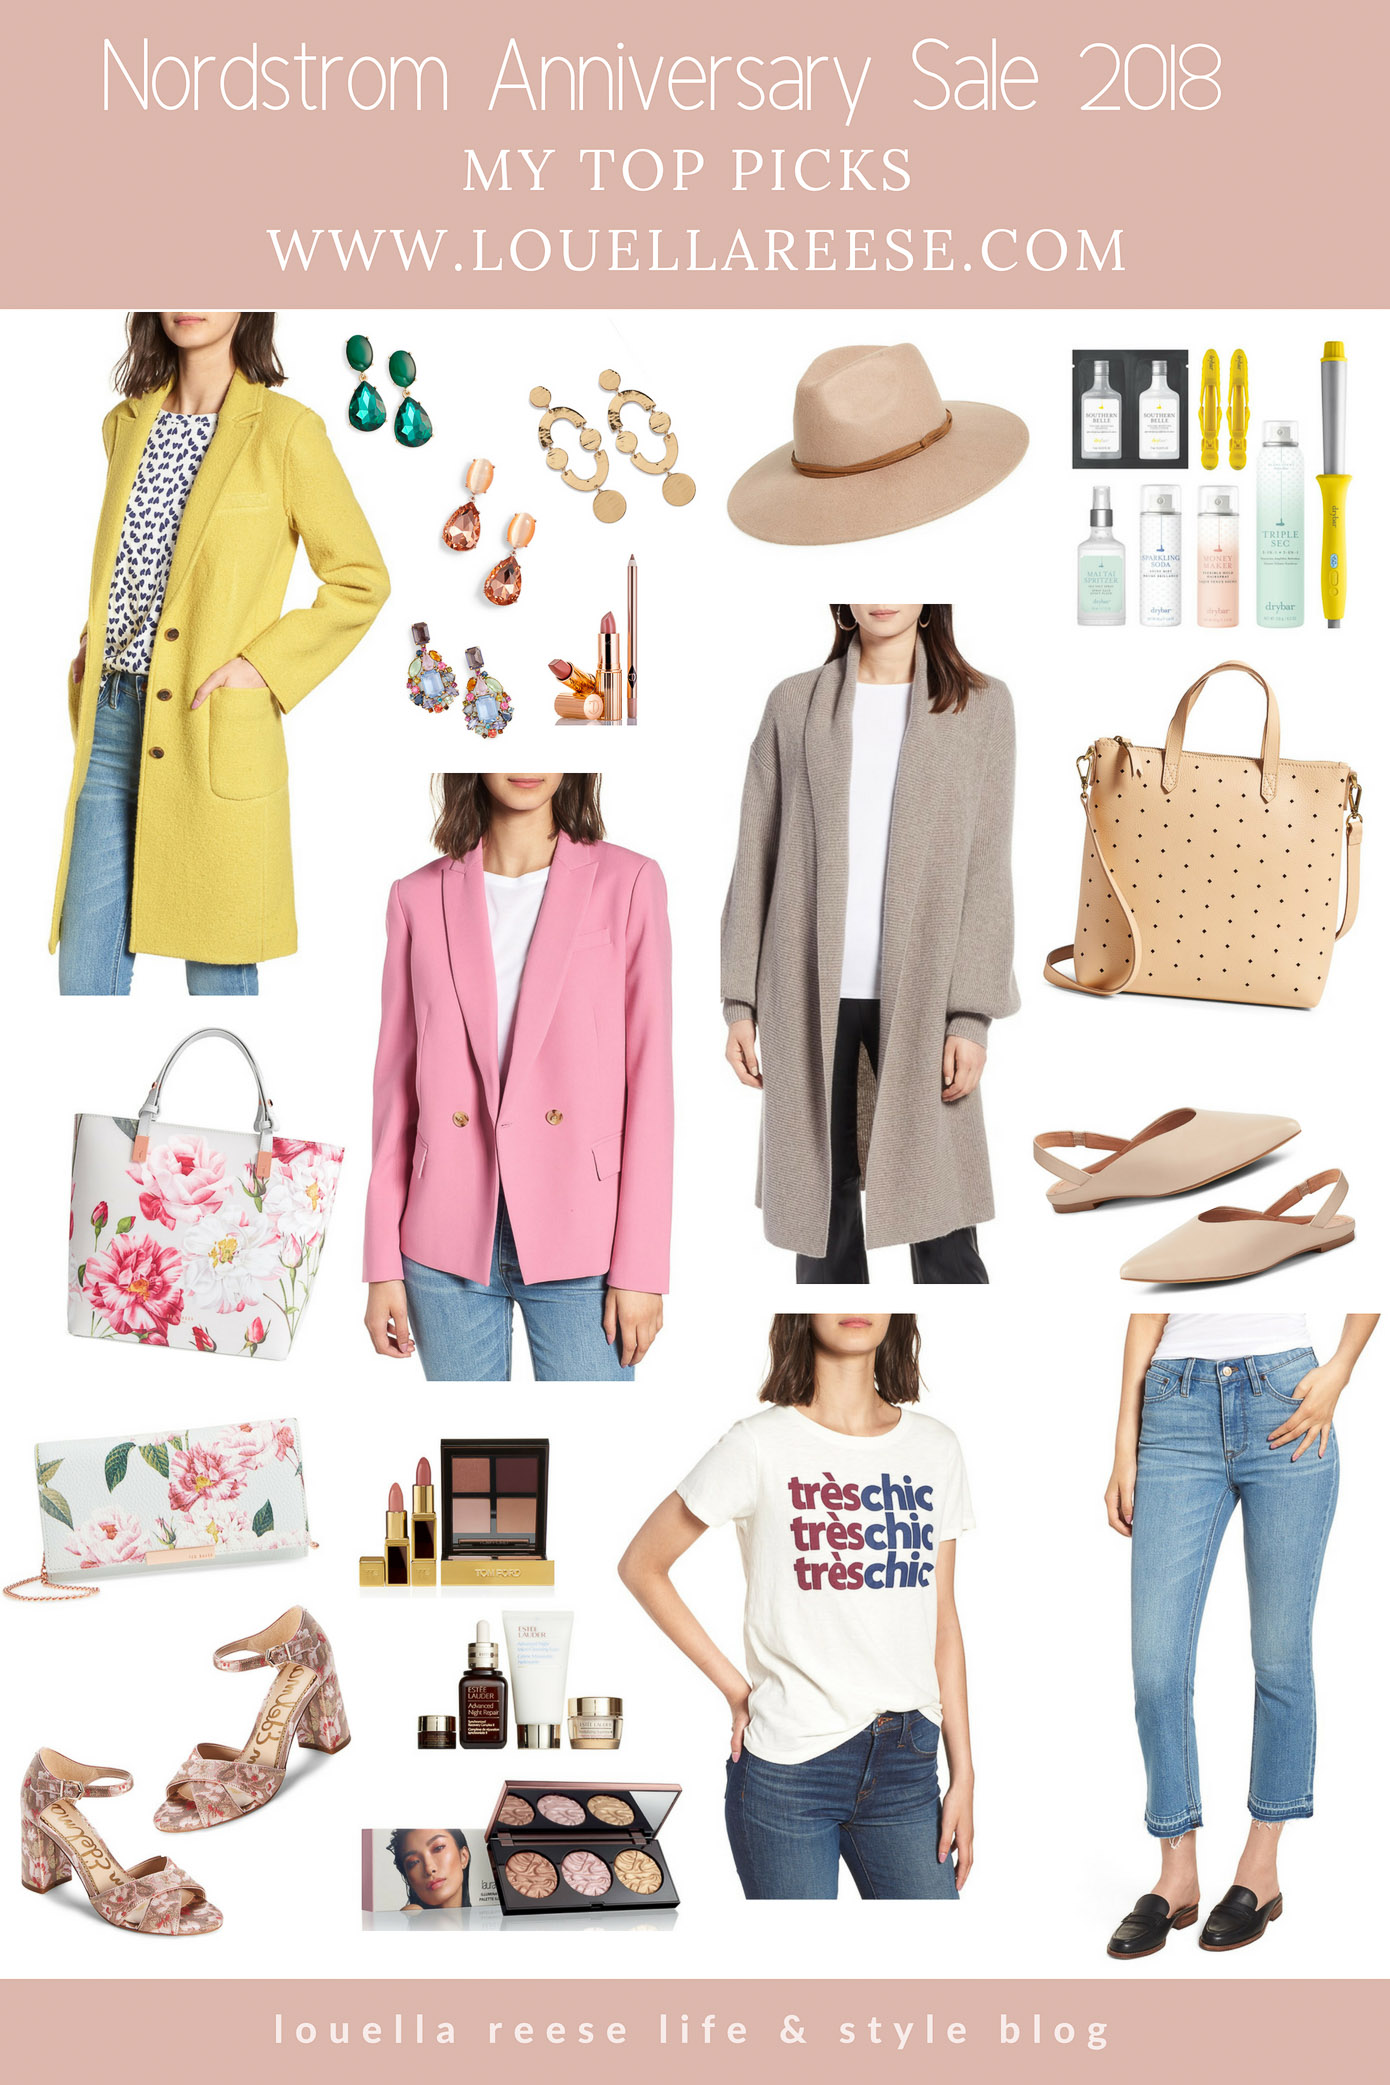 2018 Nordstrom Anniversary Sale Top Picks featured on Louella Reese Life & Style Blog